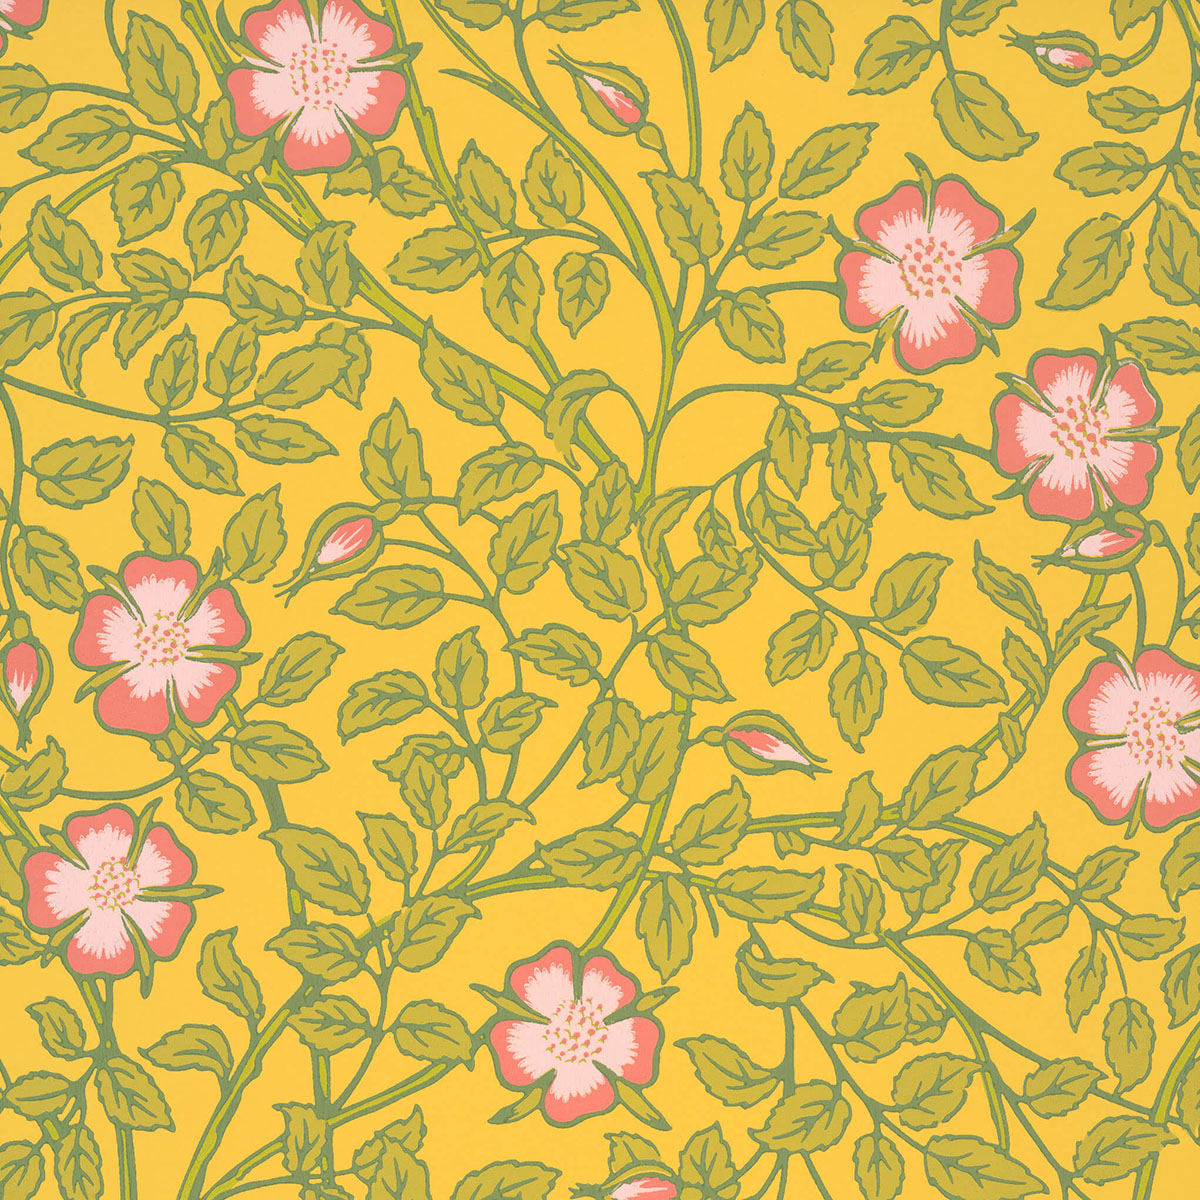 images/productimages/small/lg-ntiii-briar-rose-indian-yellow.jpg